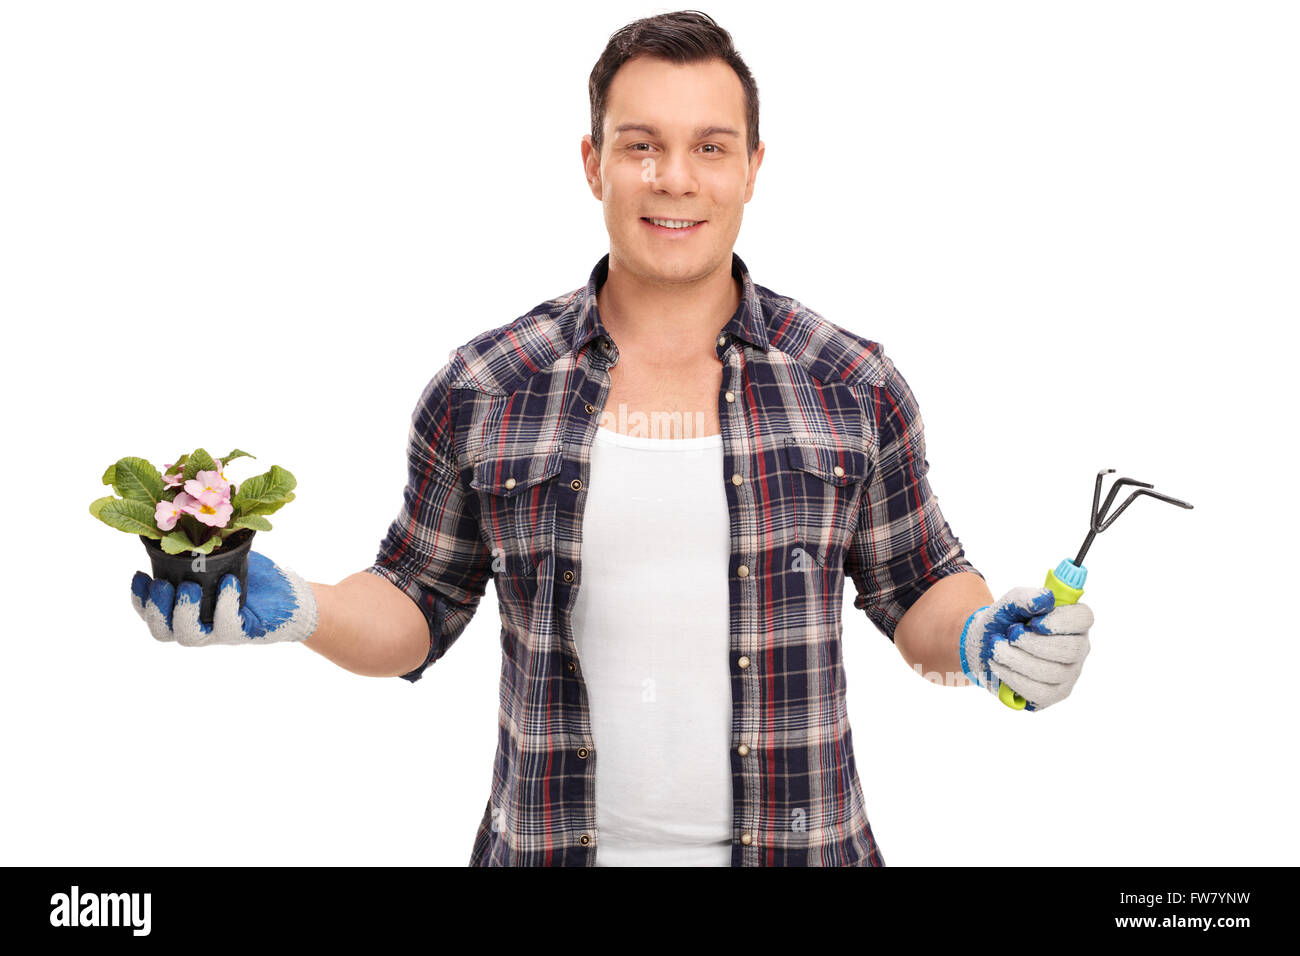 Cheerful gardener holding a flowerpot and a small gardening rake isolated on white background Stock Photo